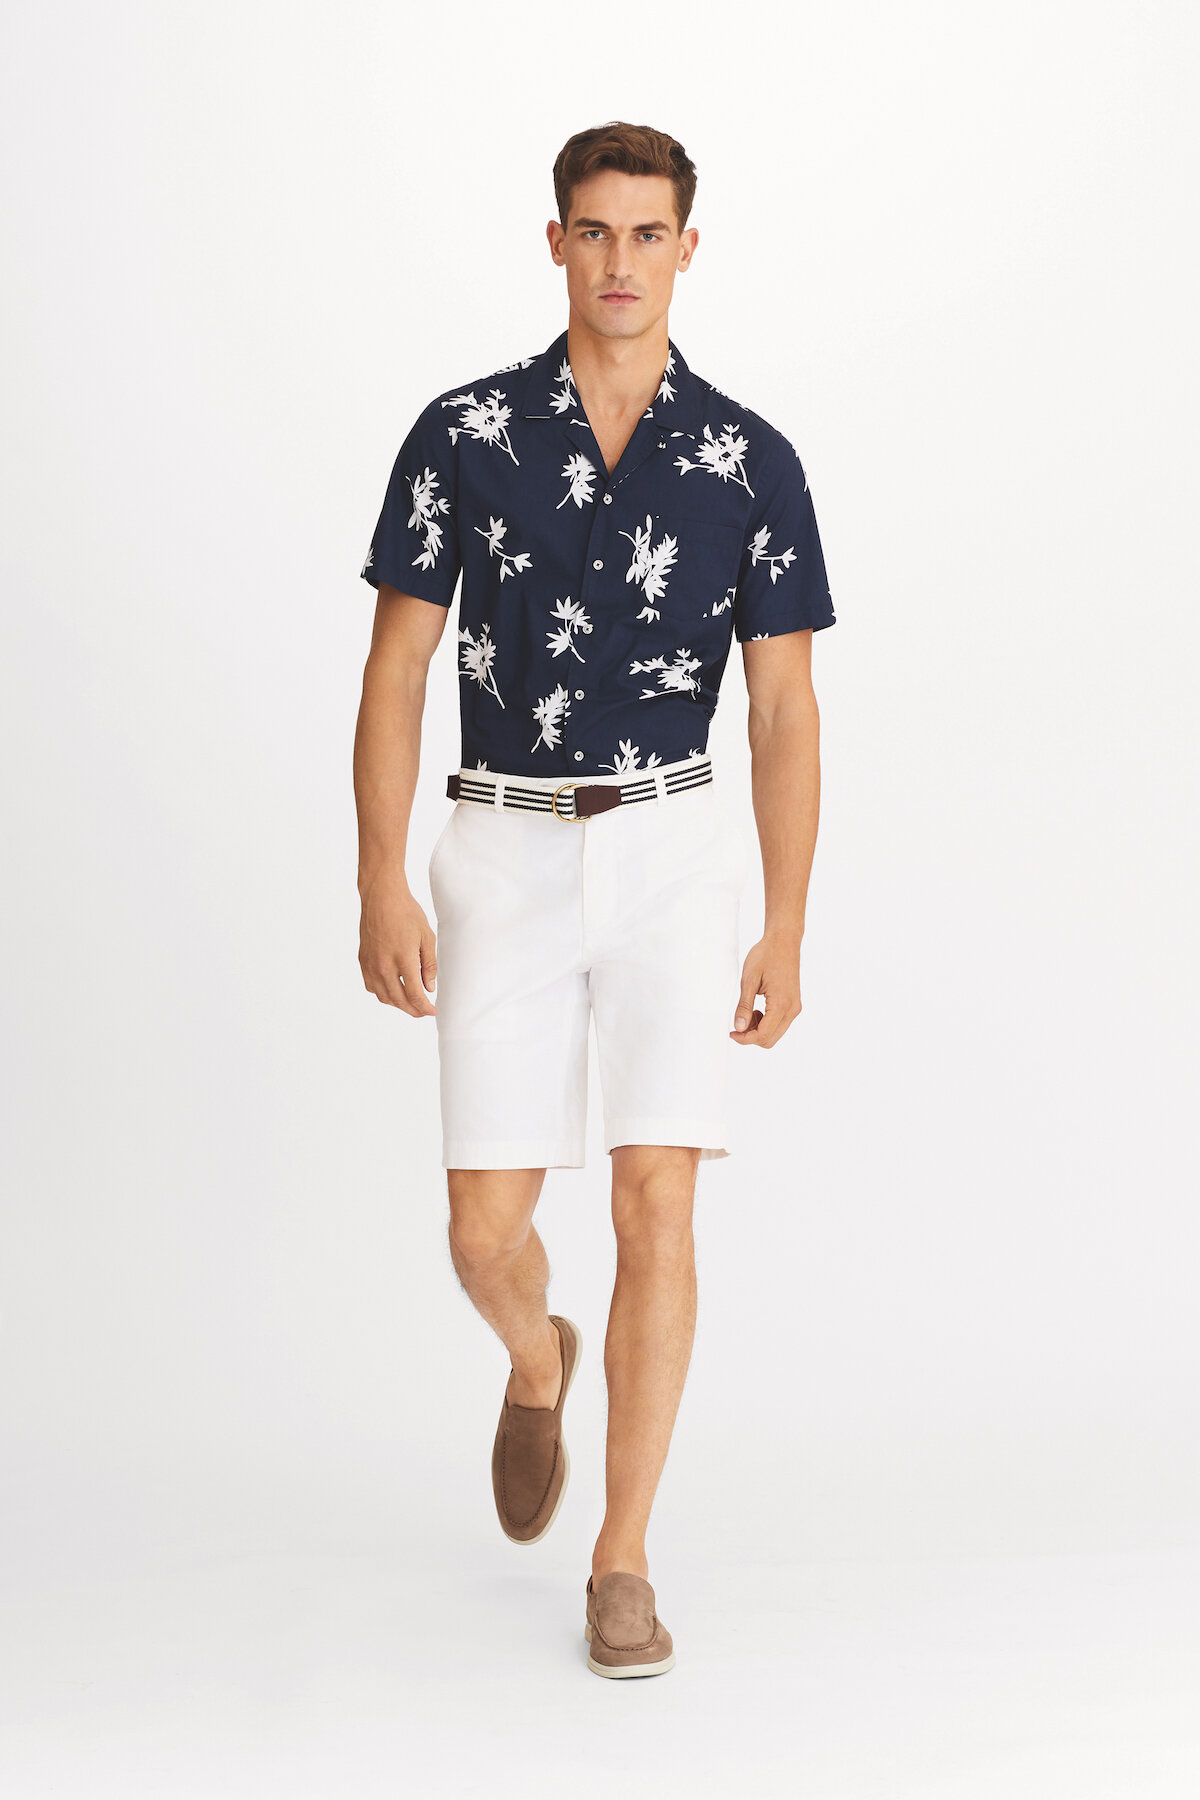 Grab Your Summer Essentials At Brooks Brothers Summer 20 Mainline ...